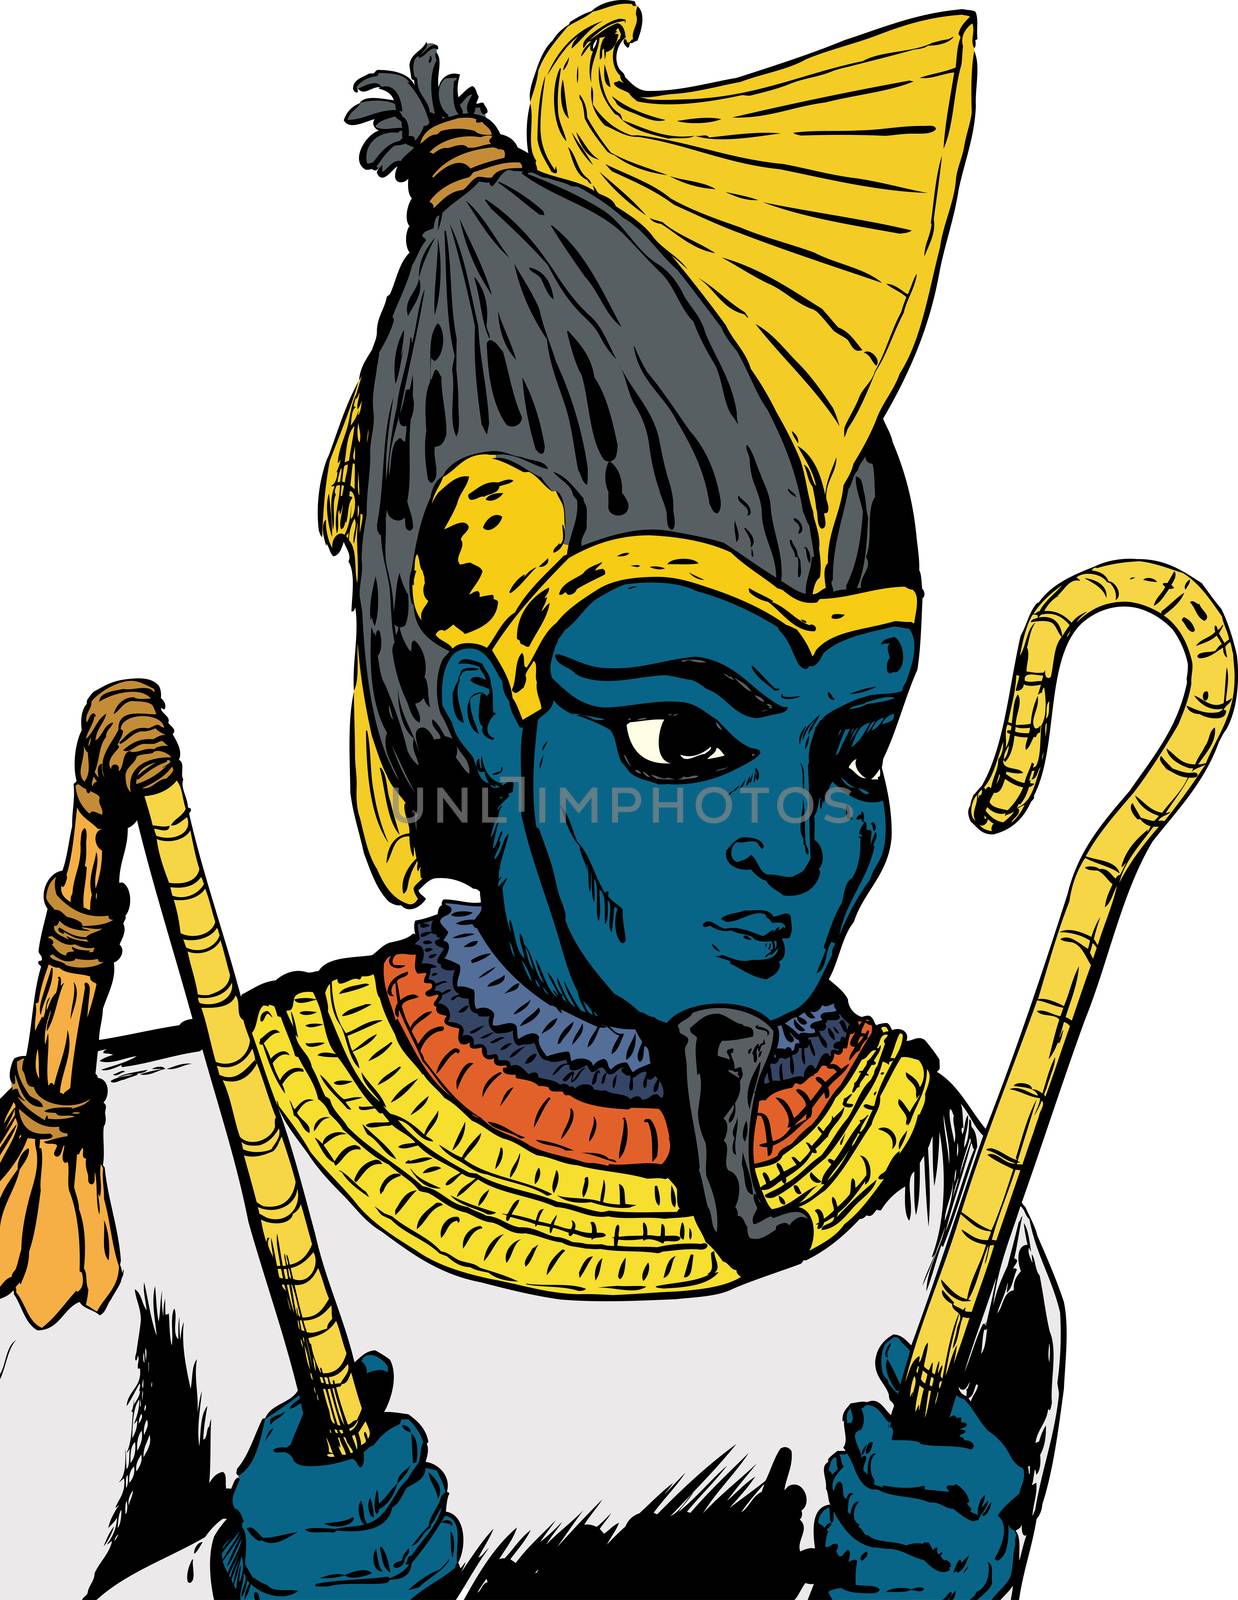 Illustration of Osiris, the Egyptian God, holding his crook and flail